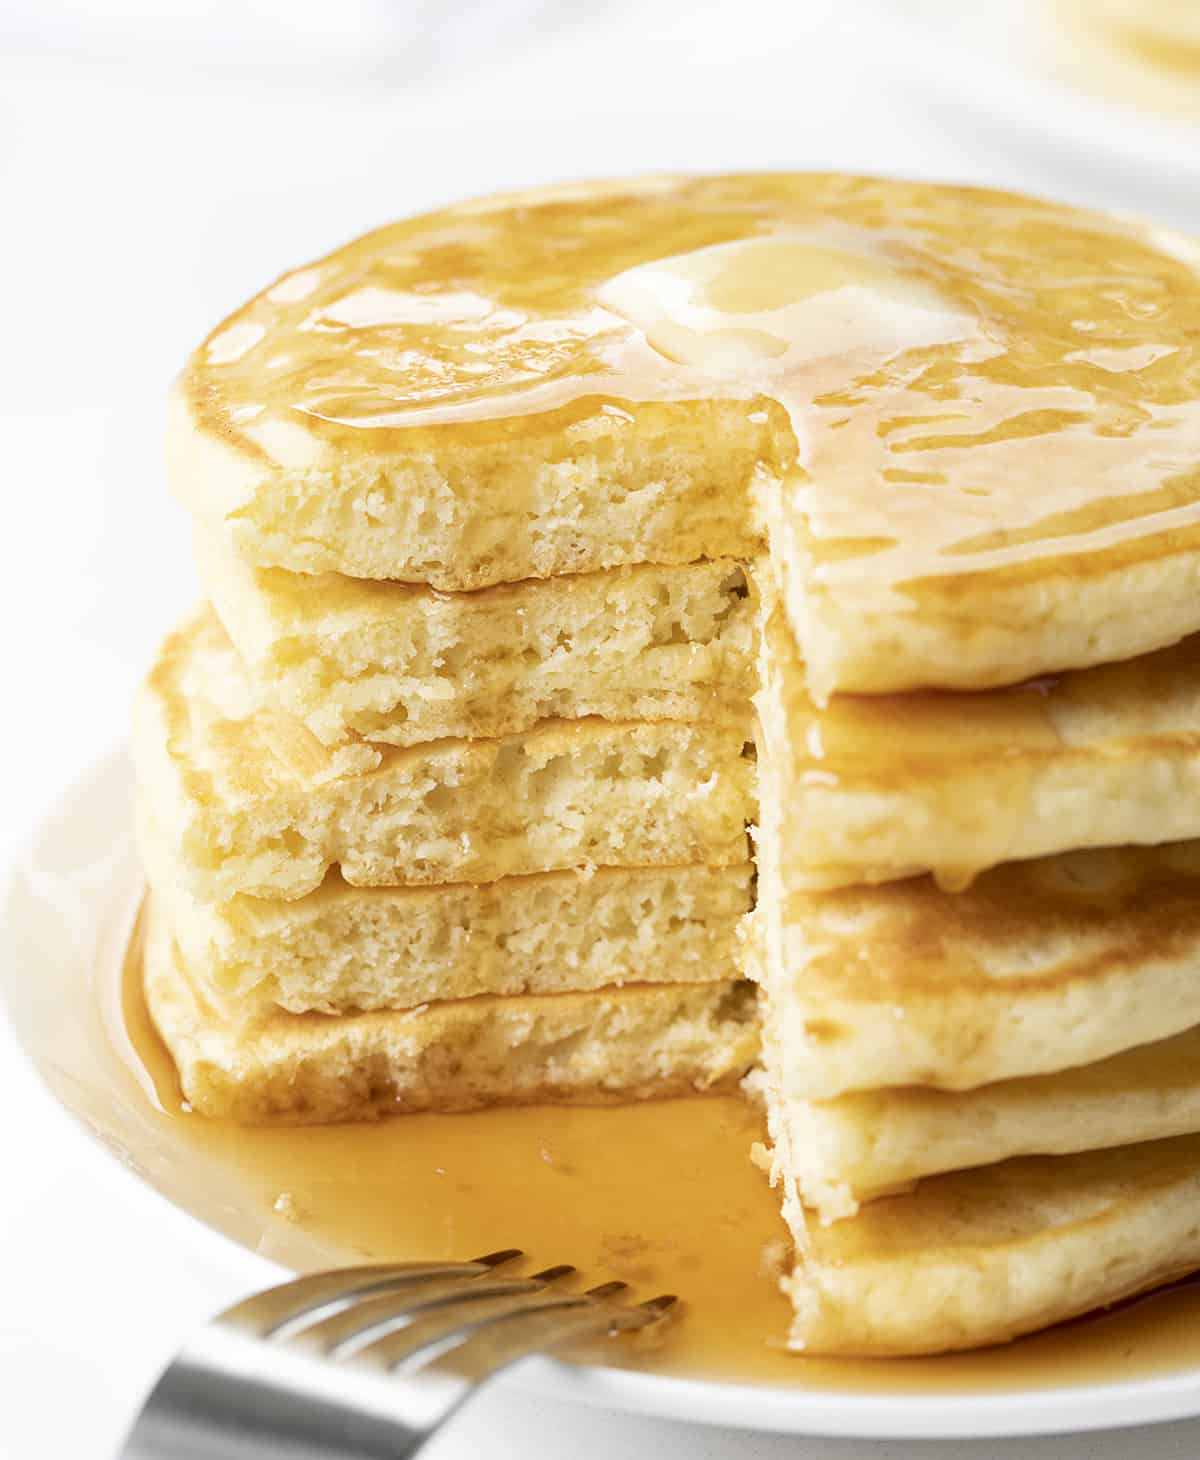 Stack of Grandma's Old Fashioned Pancakes with Pice Cut Out. Breakfast, Pancakes, Old Fahsioned Pancakes, Classic Pancake Recipe, Grandma's Pancake Recipe, i am baker, iambaker.